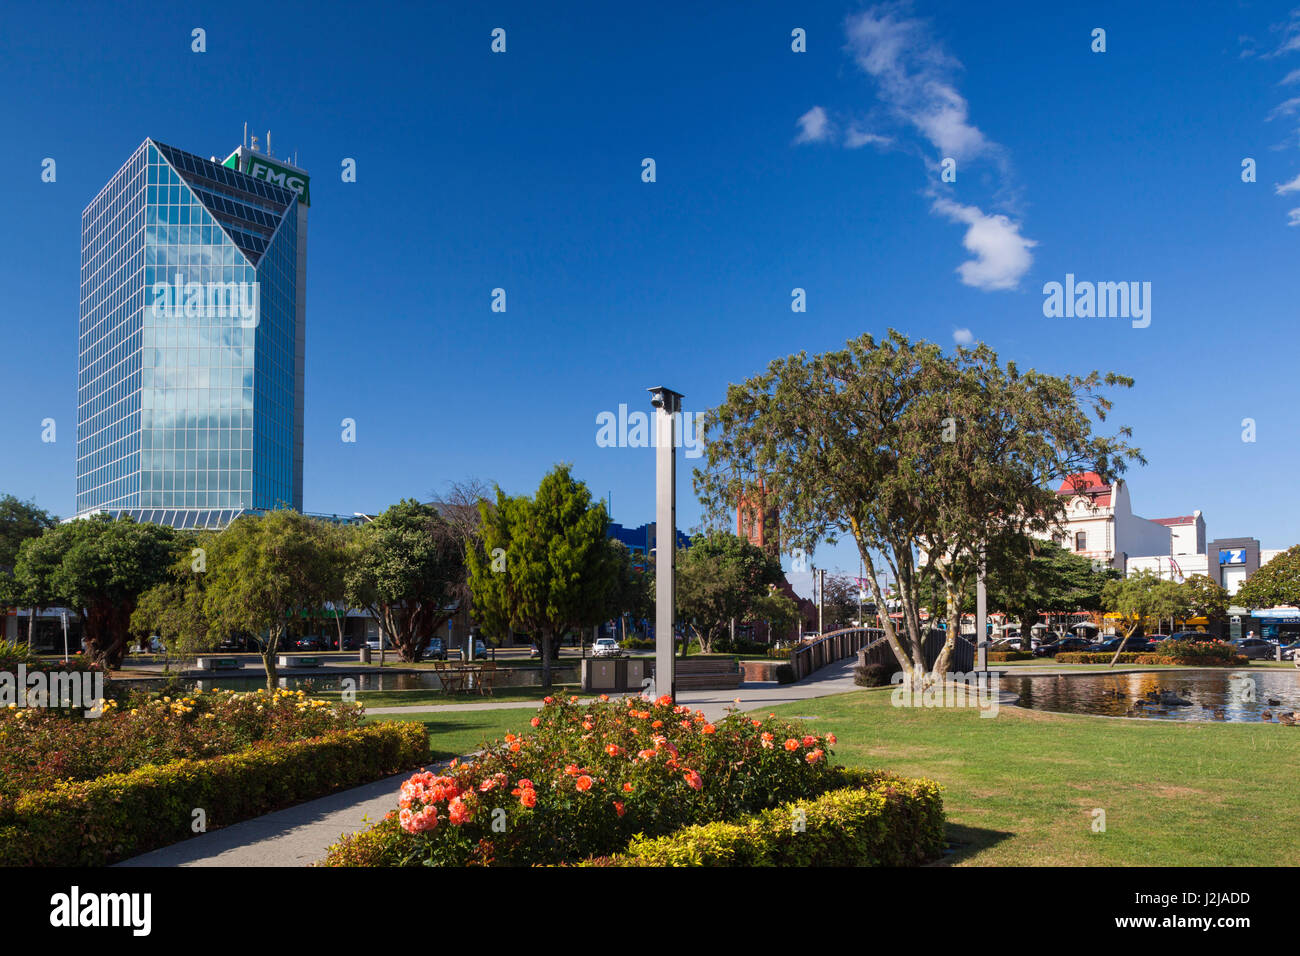 New Zealand, North Island, Palmerston North, The Square, central park Stock Photo